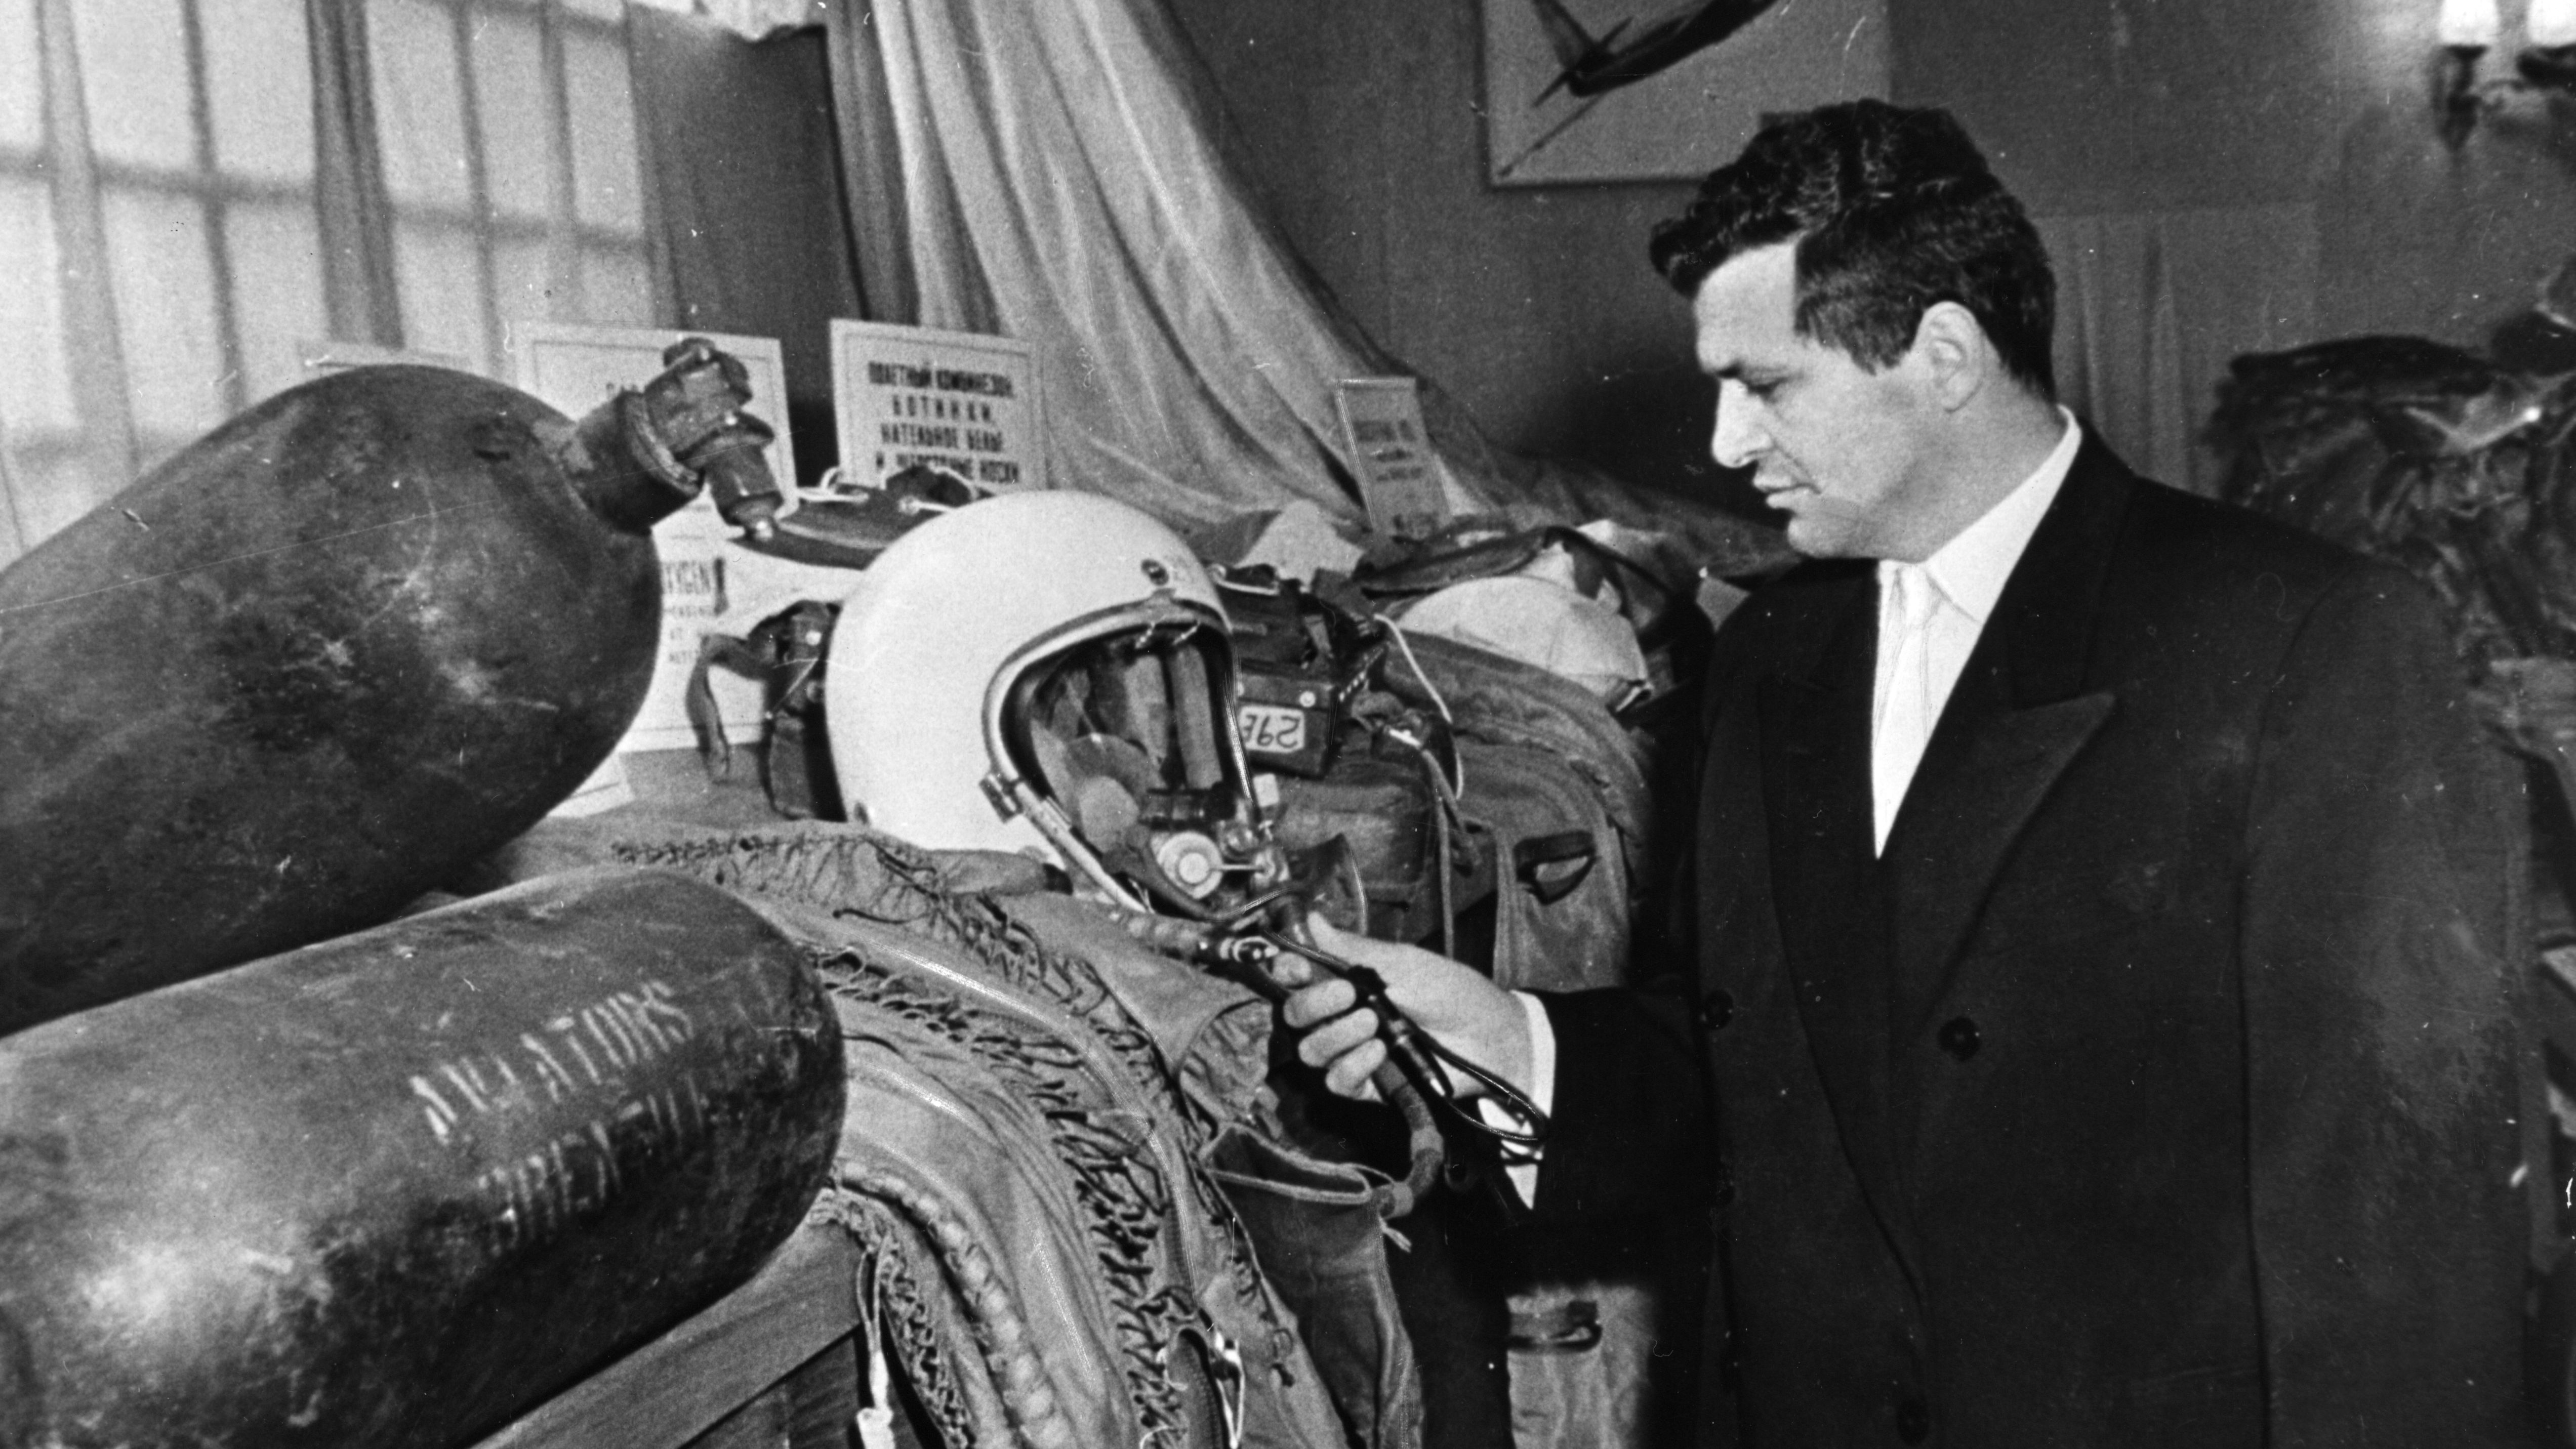 U-2 spy plane pilot Francis Gary Powers poses with his flight helmet among other evidence related to his Moscow trial in 1960. After the Soviets announced the capture of Powers, the United States recanted earlier assertions that the plane was on a weather research mission.